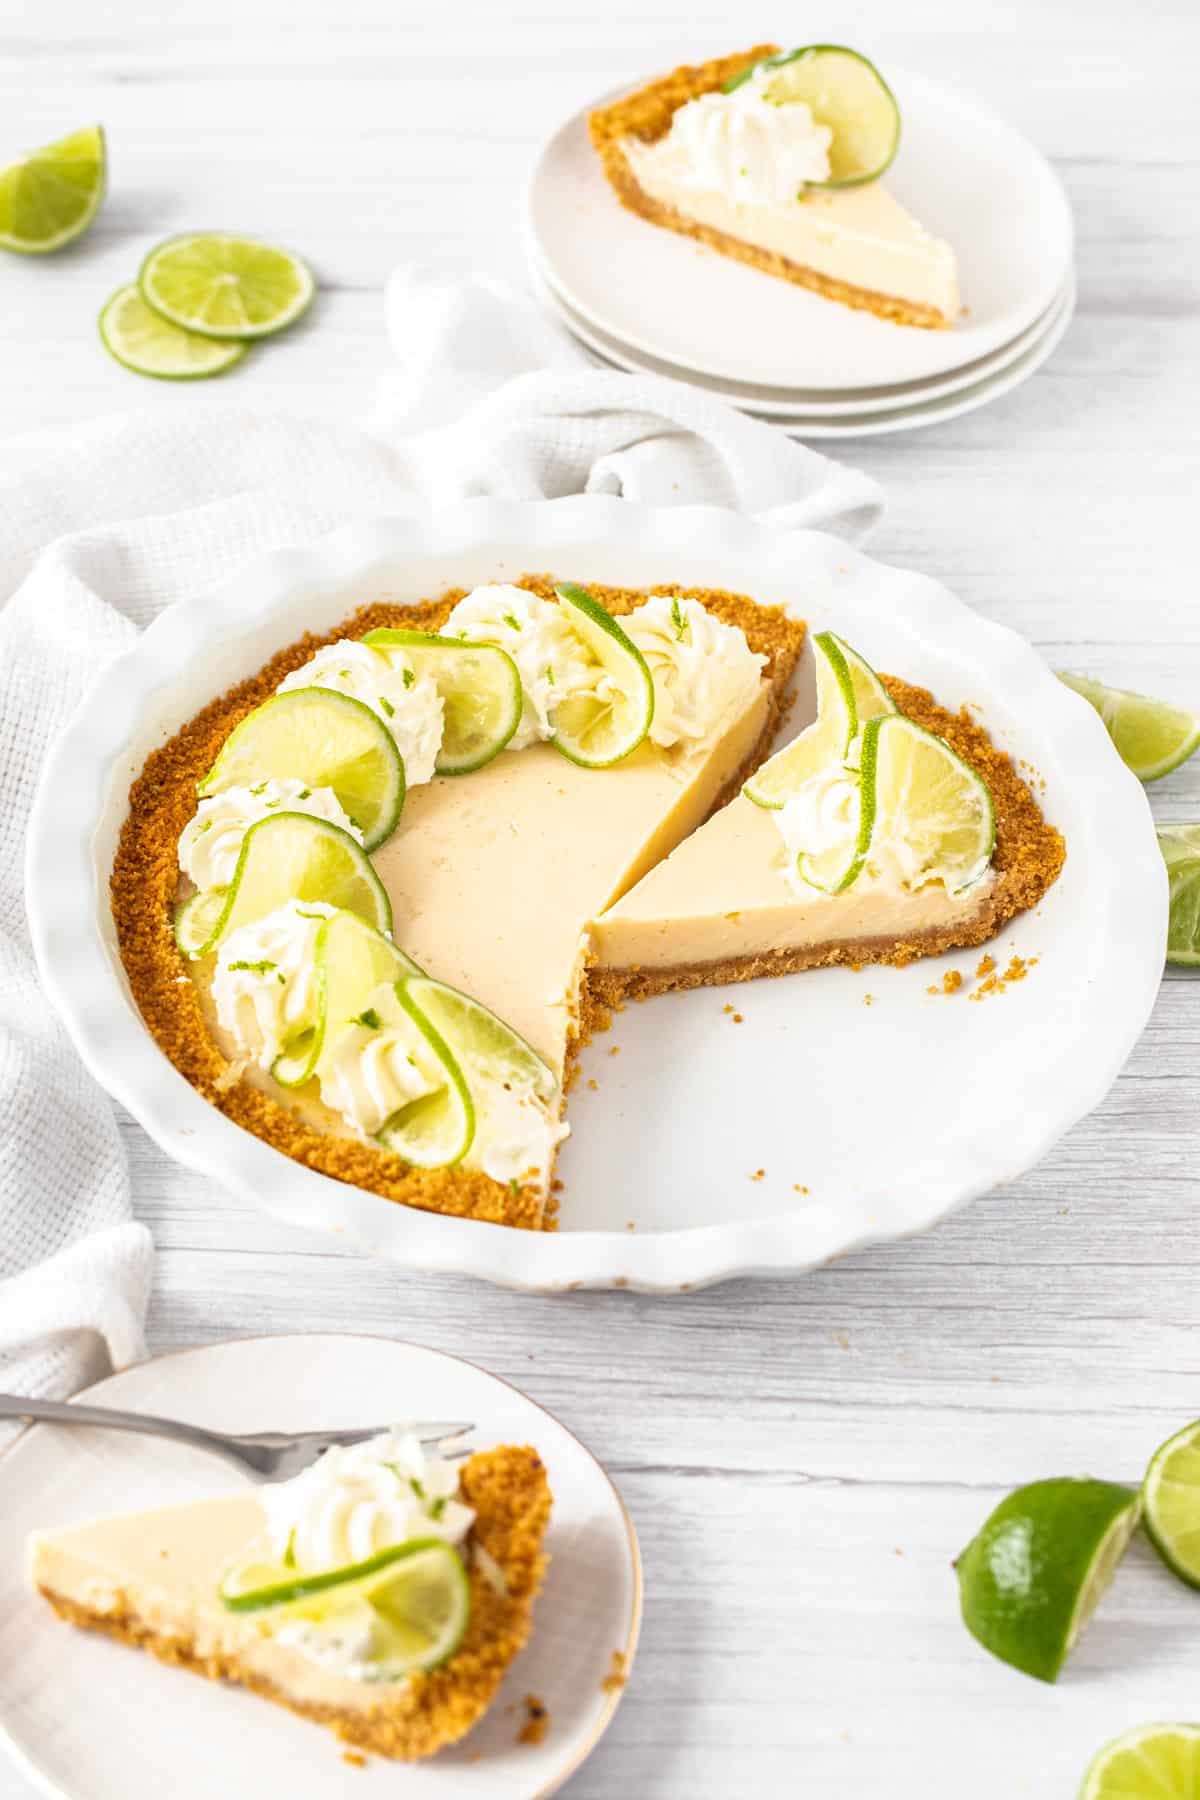 Key Lime Pie, with some slices removed sitting on plates.